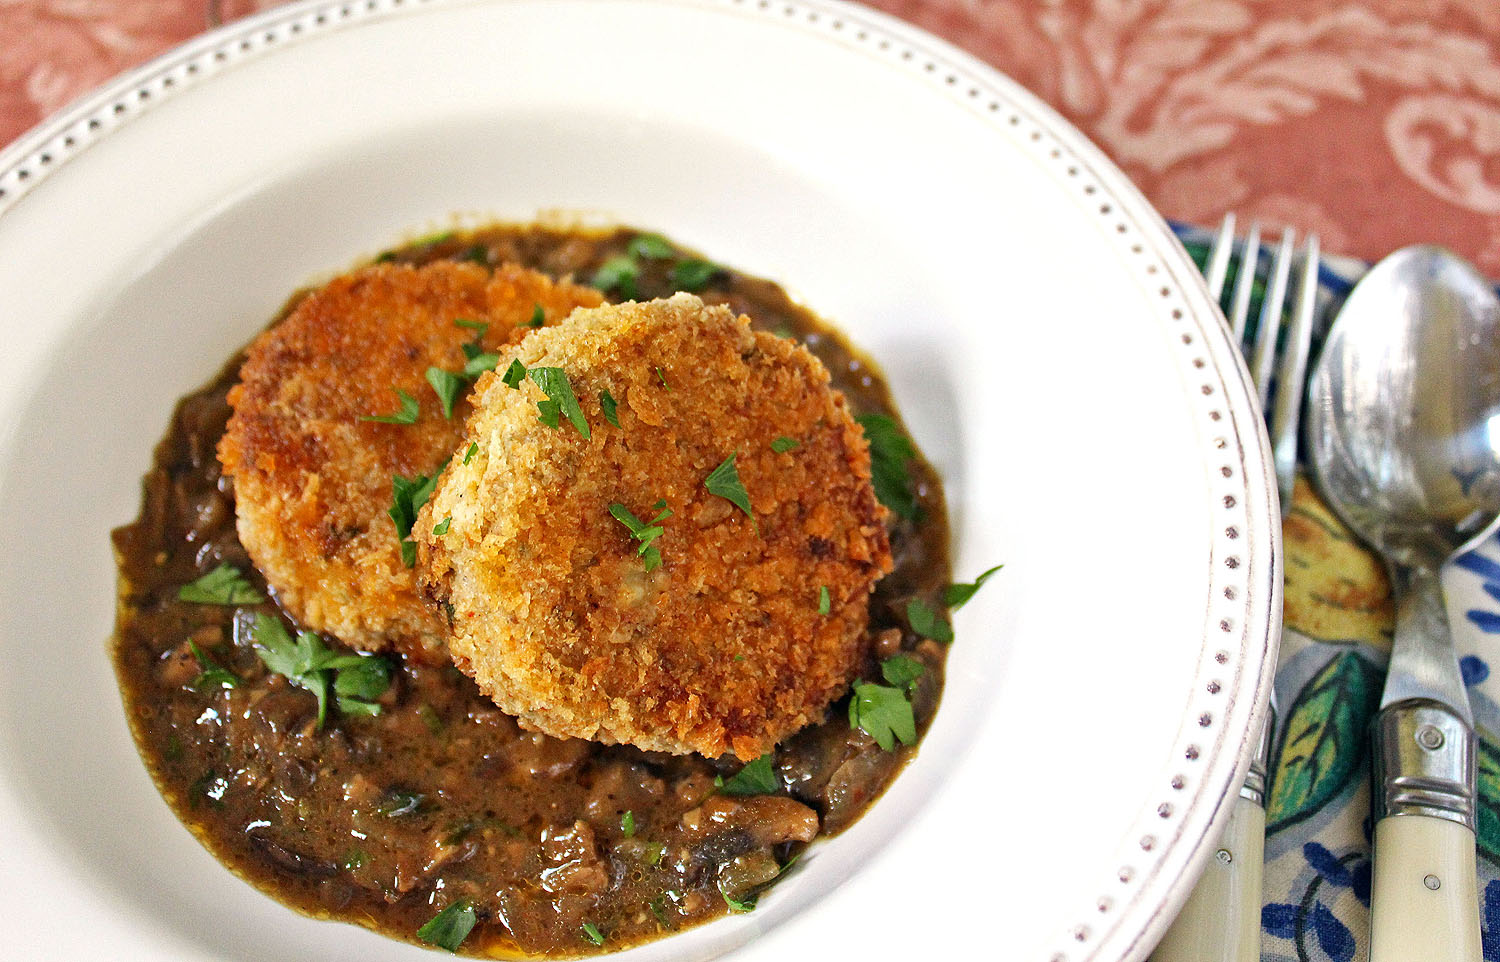 Pozharsky Cutlets with Mushroom Madeira Sauce